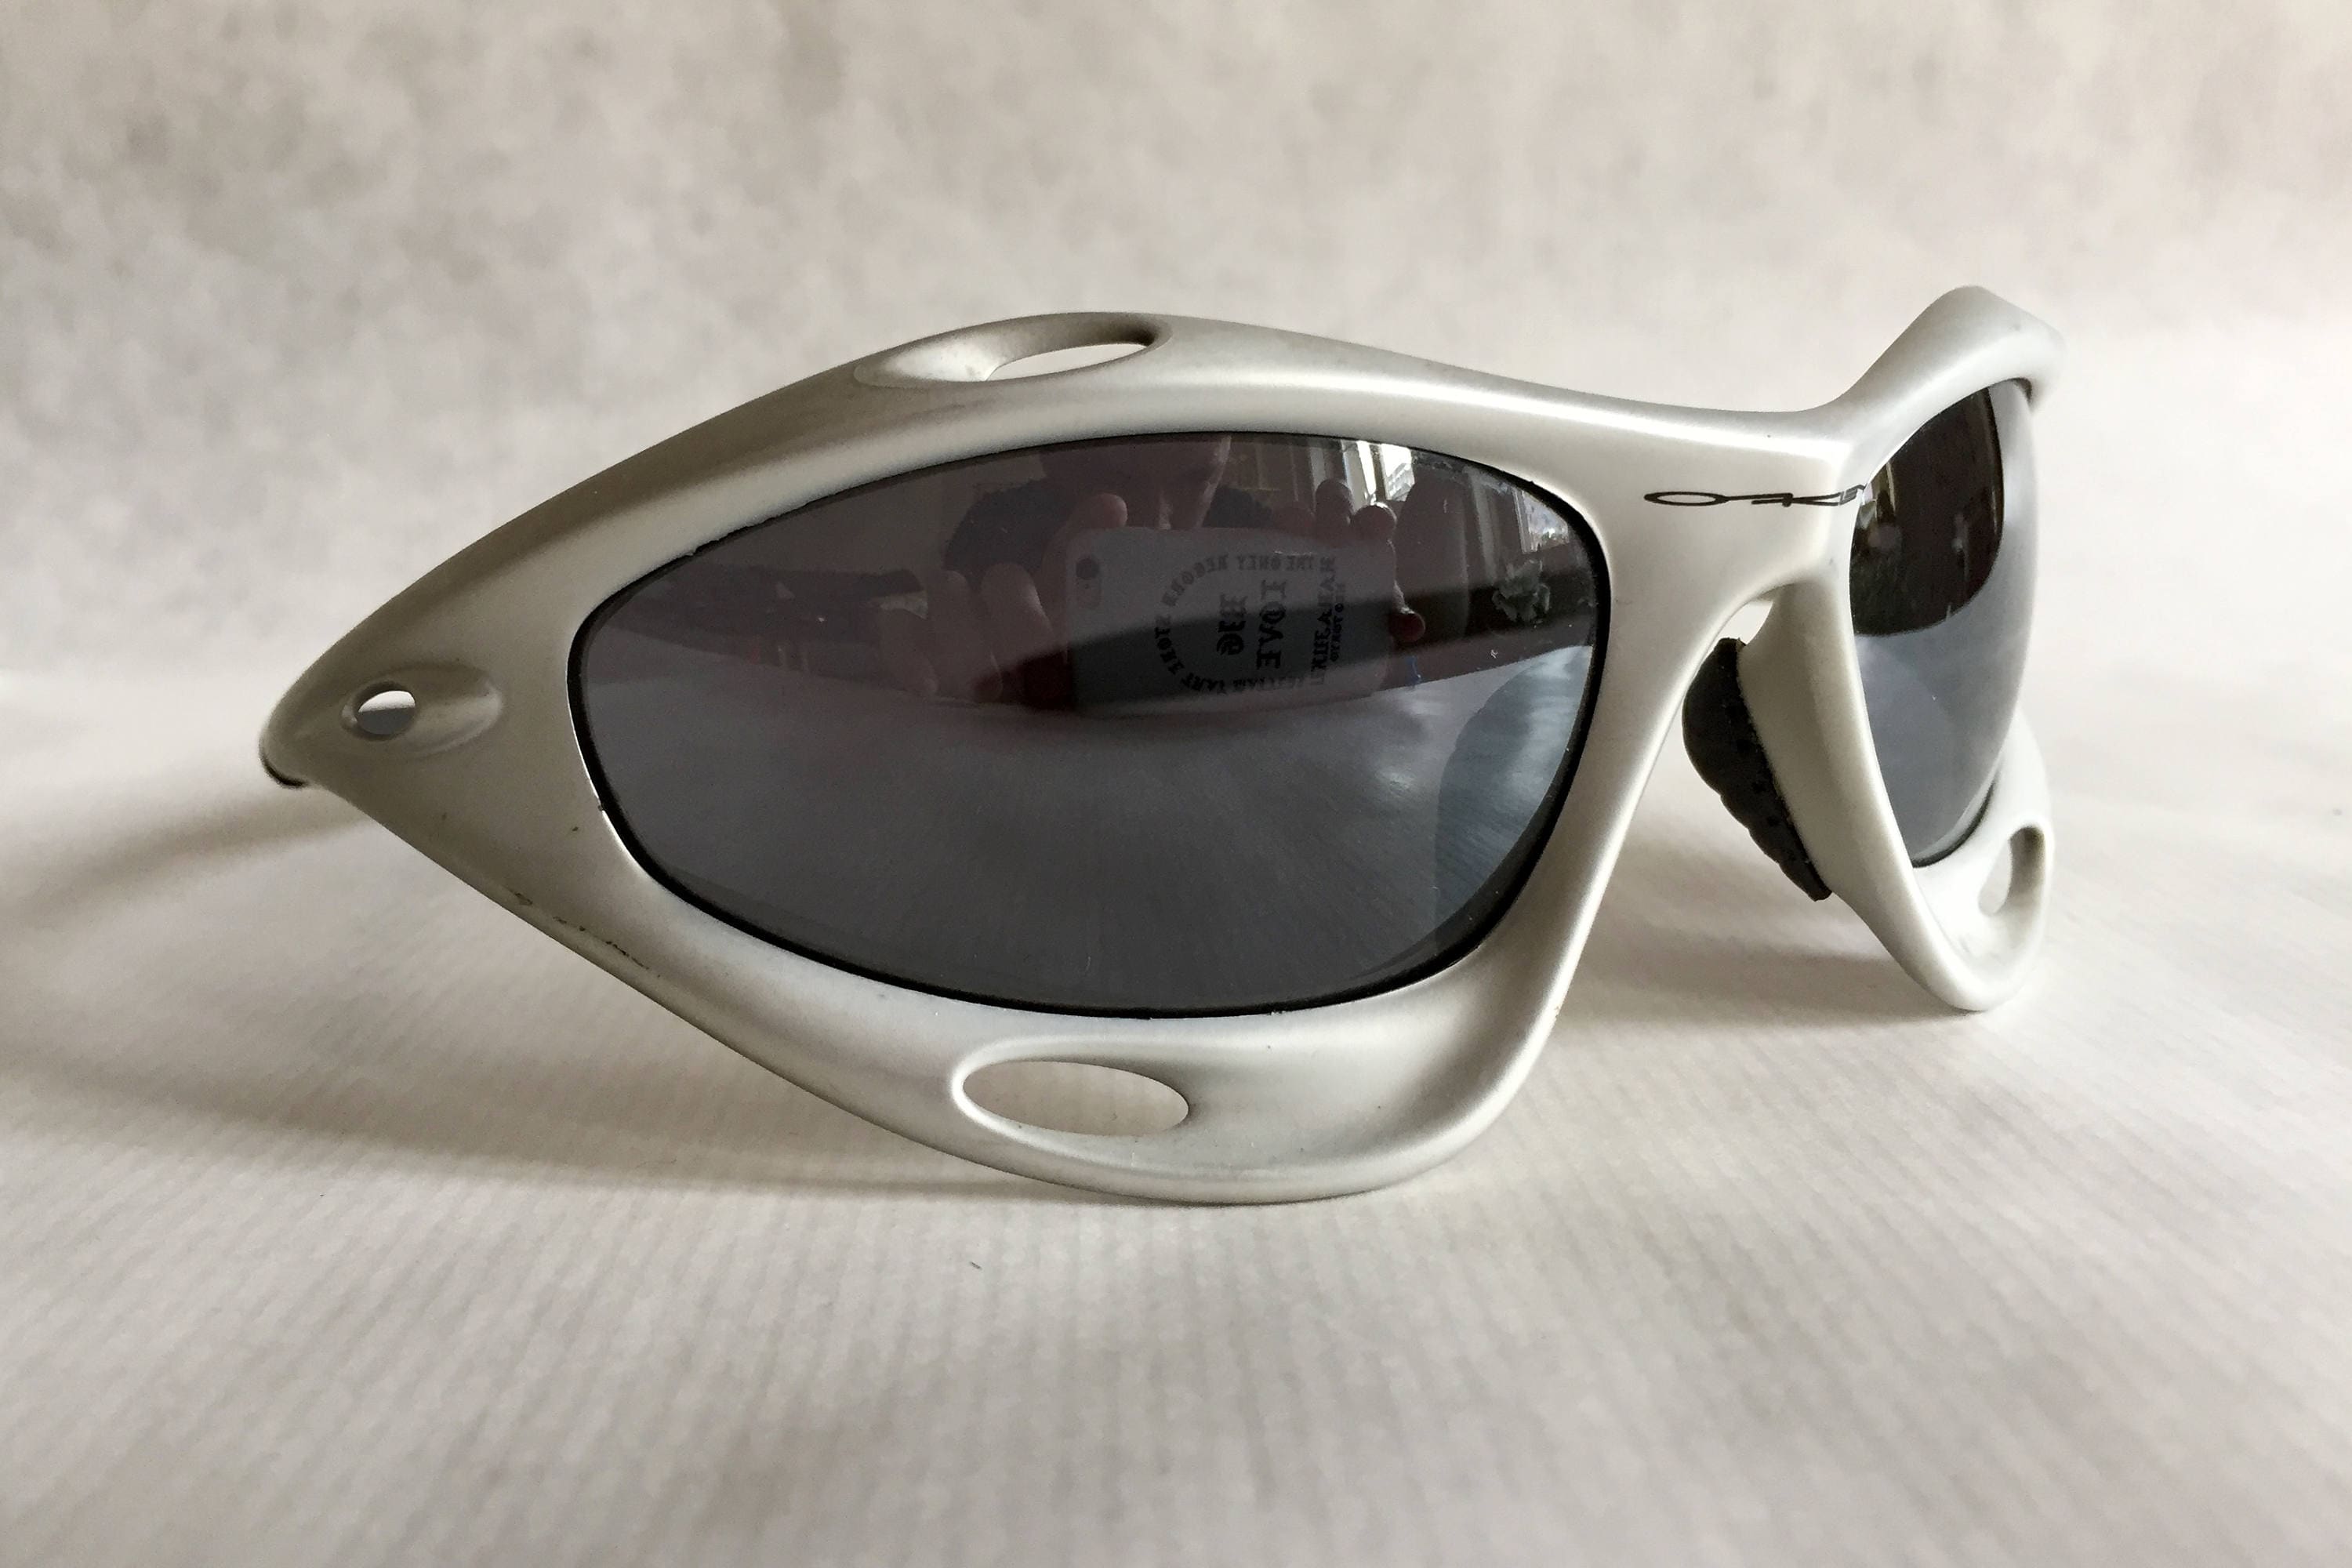 Oakley Racing Jacket Vintage Sunglasses Made in the USA